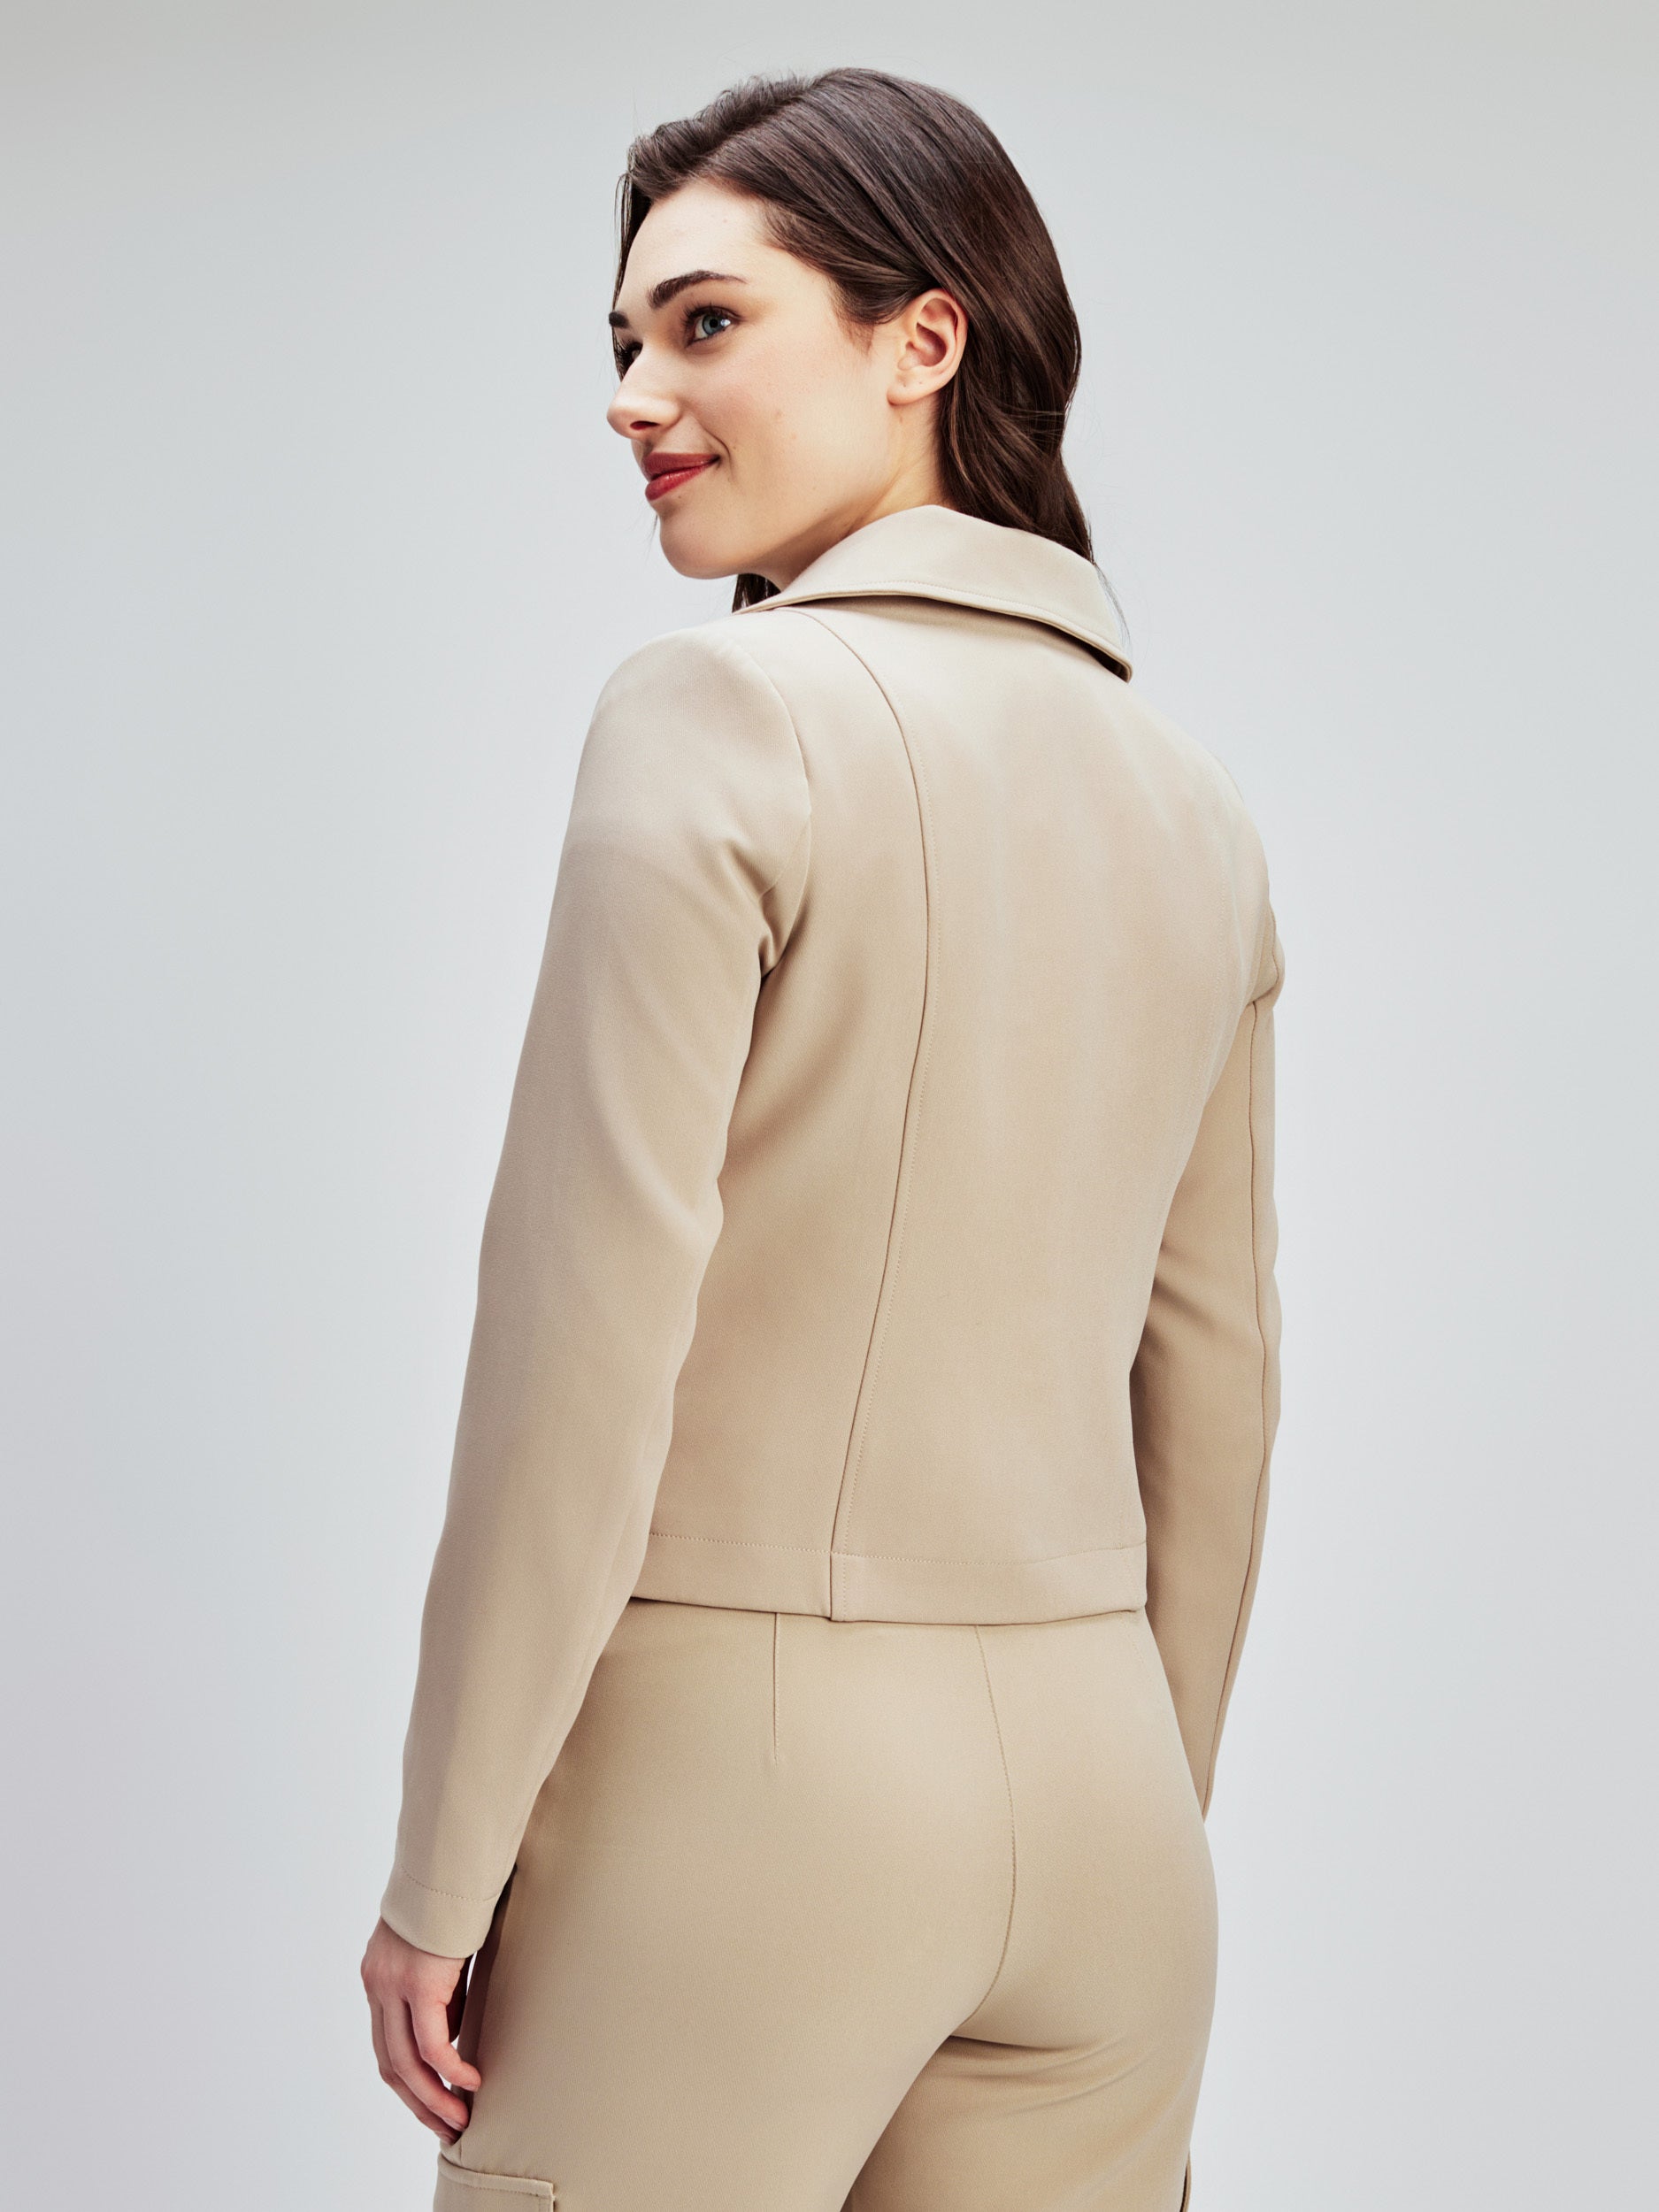 Long-sleeve semi-fitted vest